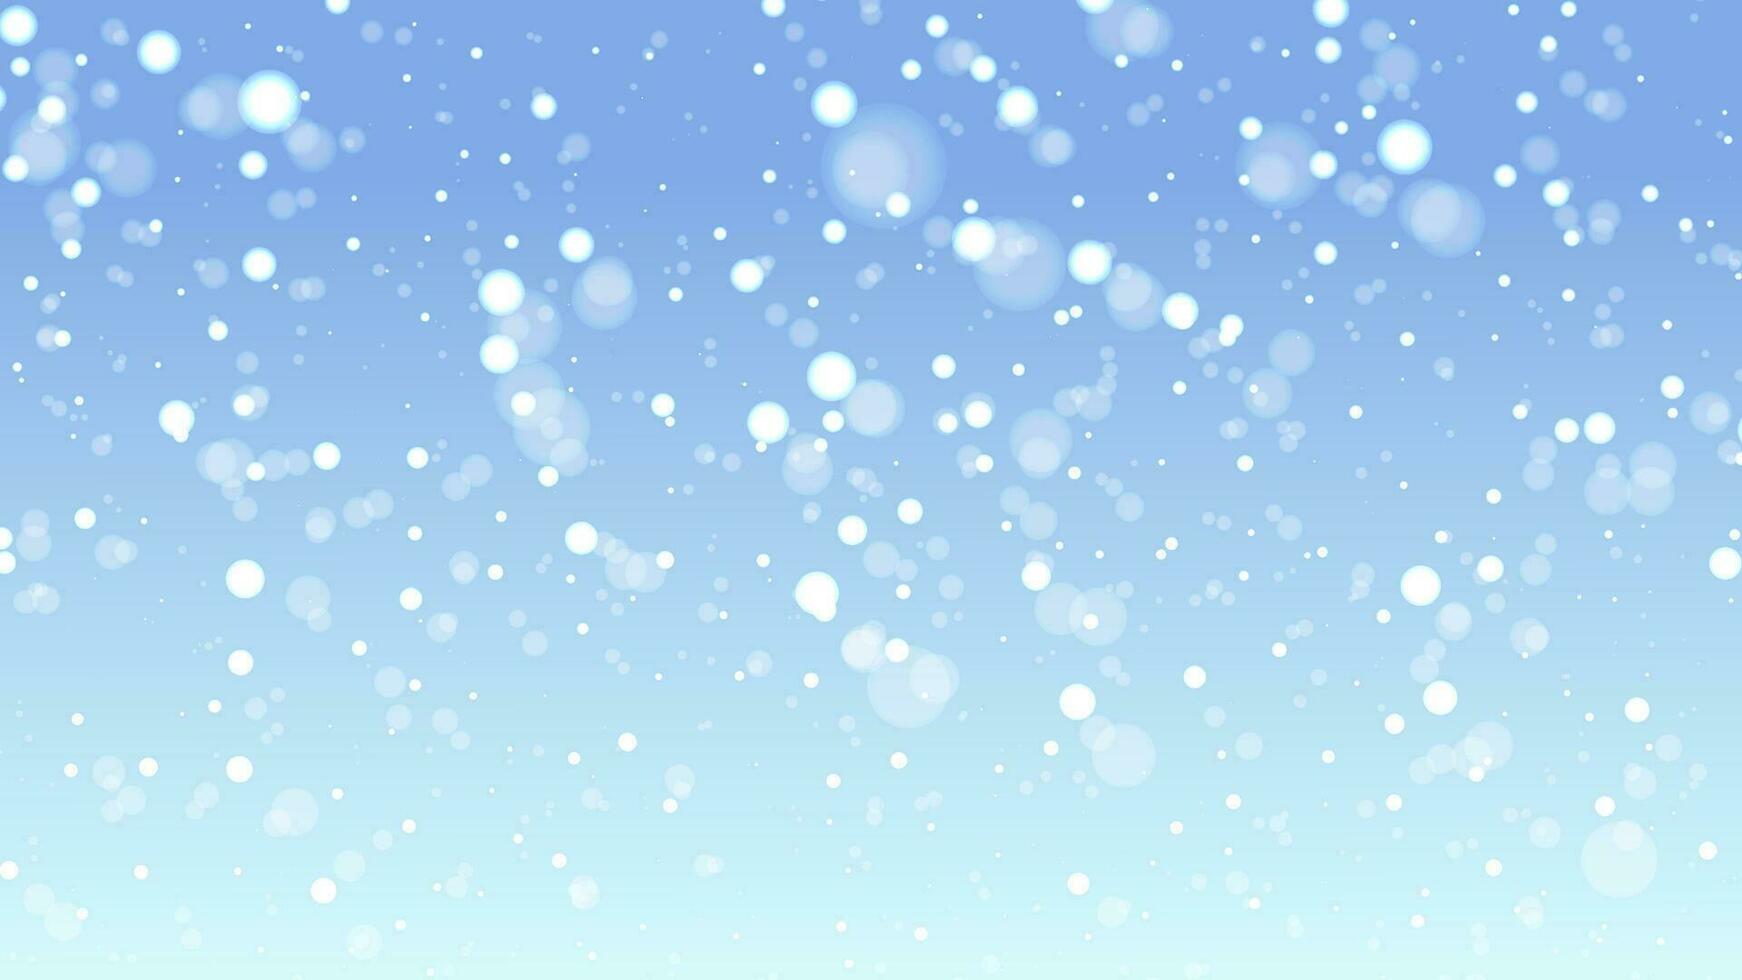 Realistic snowfall or snowflakes. isolated with a blue background. Vector illustration element